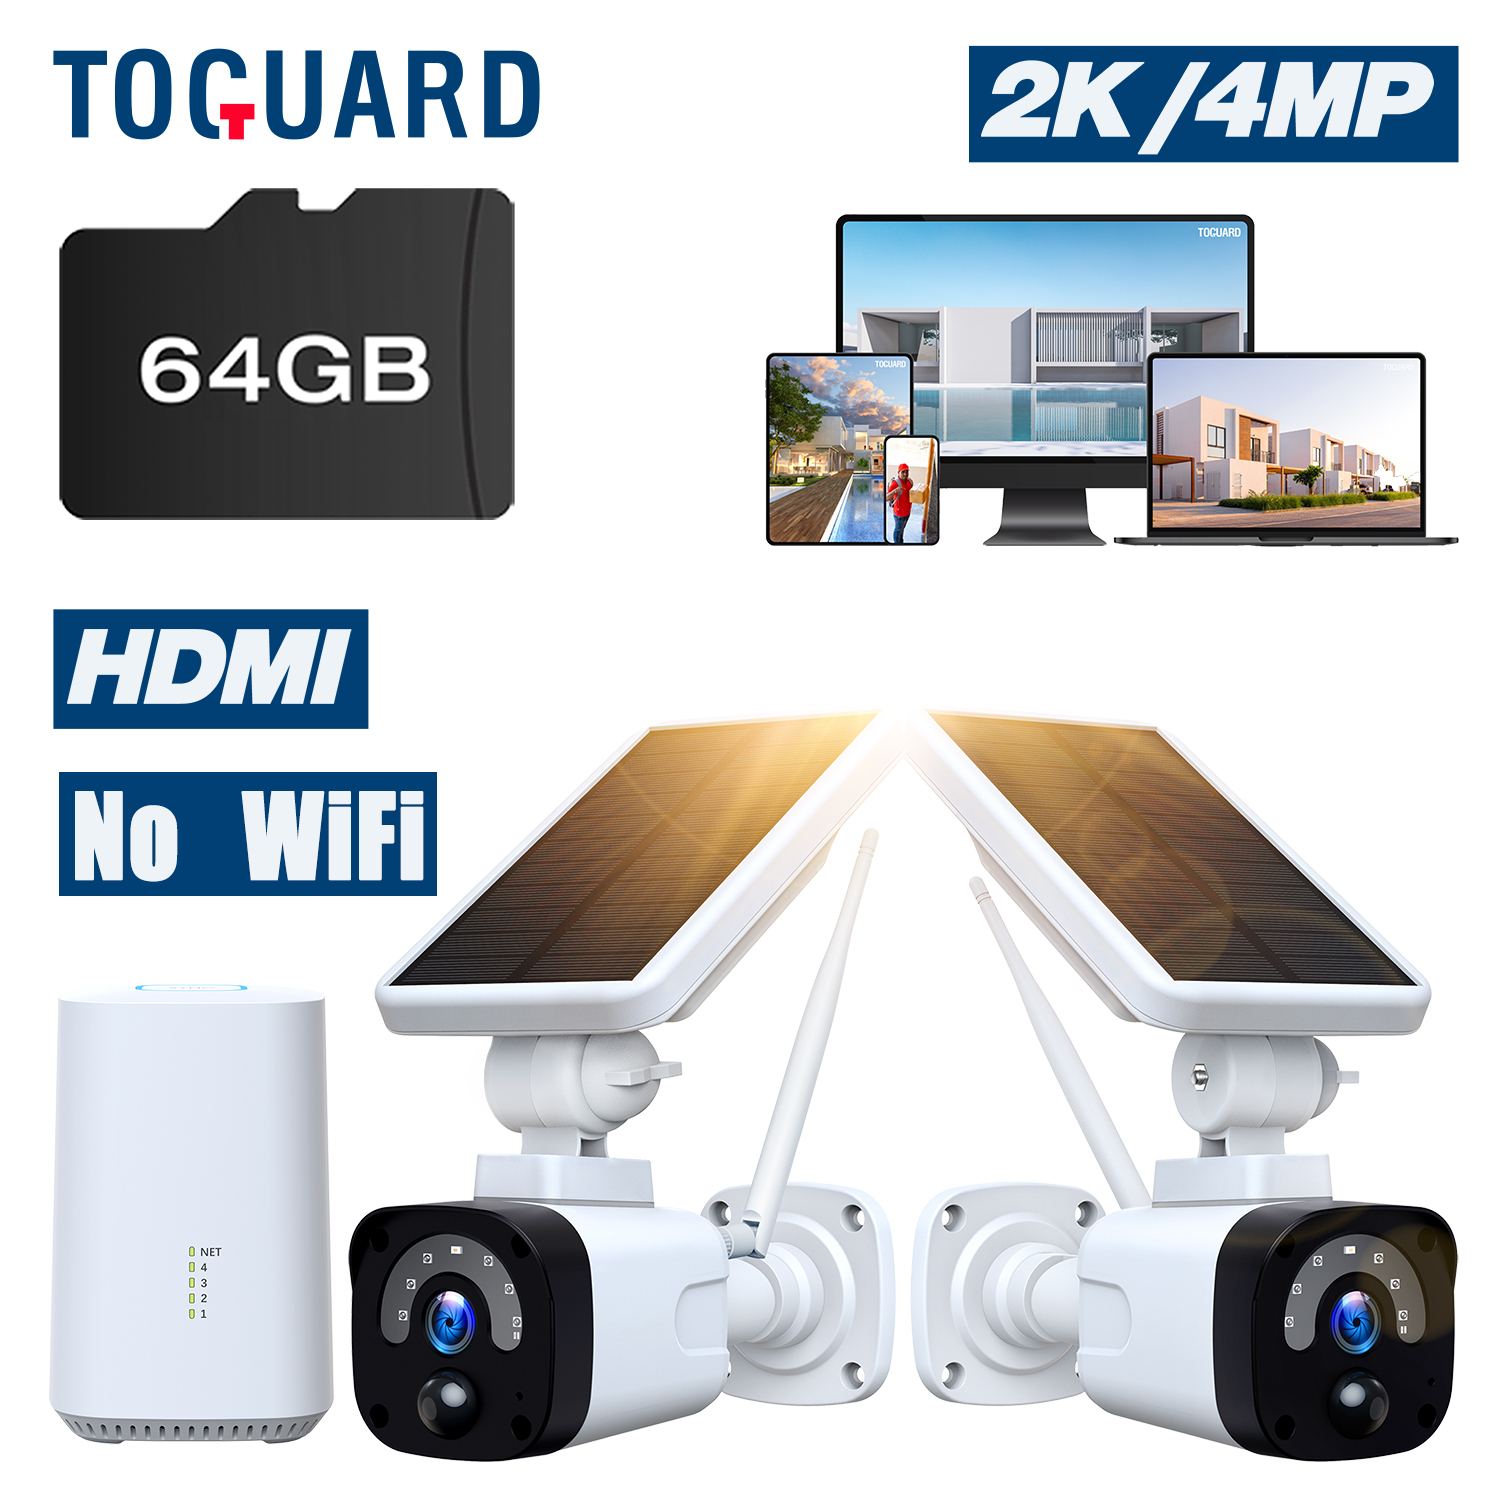 Toguard SC04A Solar Wireless Security Camera System Outdoor Battery WiFi Bullet Surveillance Camera Wireless Connector - image 1 of 9